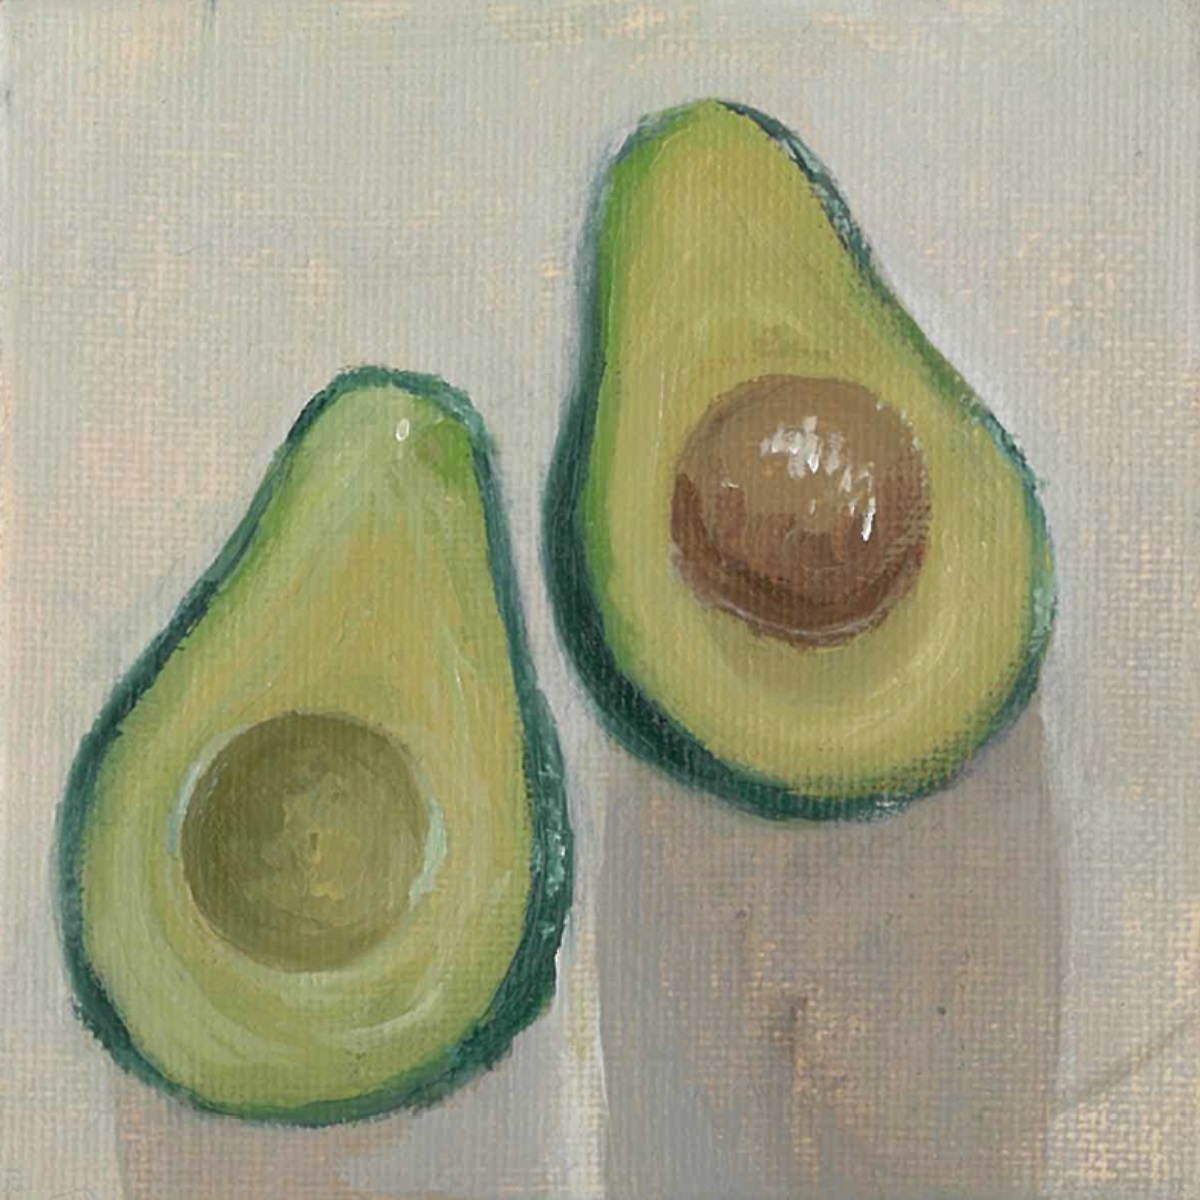 A painting of the insides of a halved green avocado.